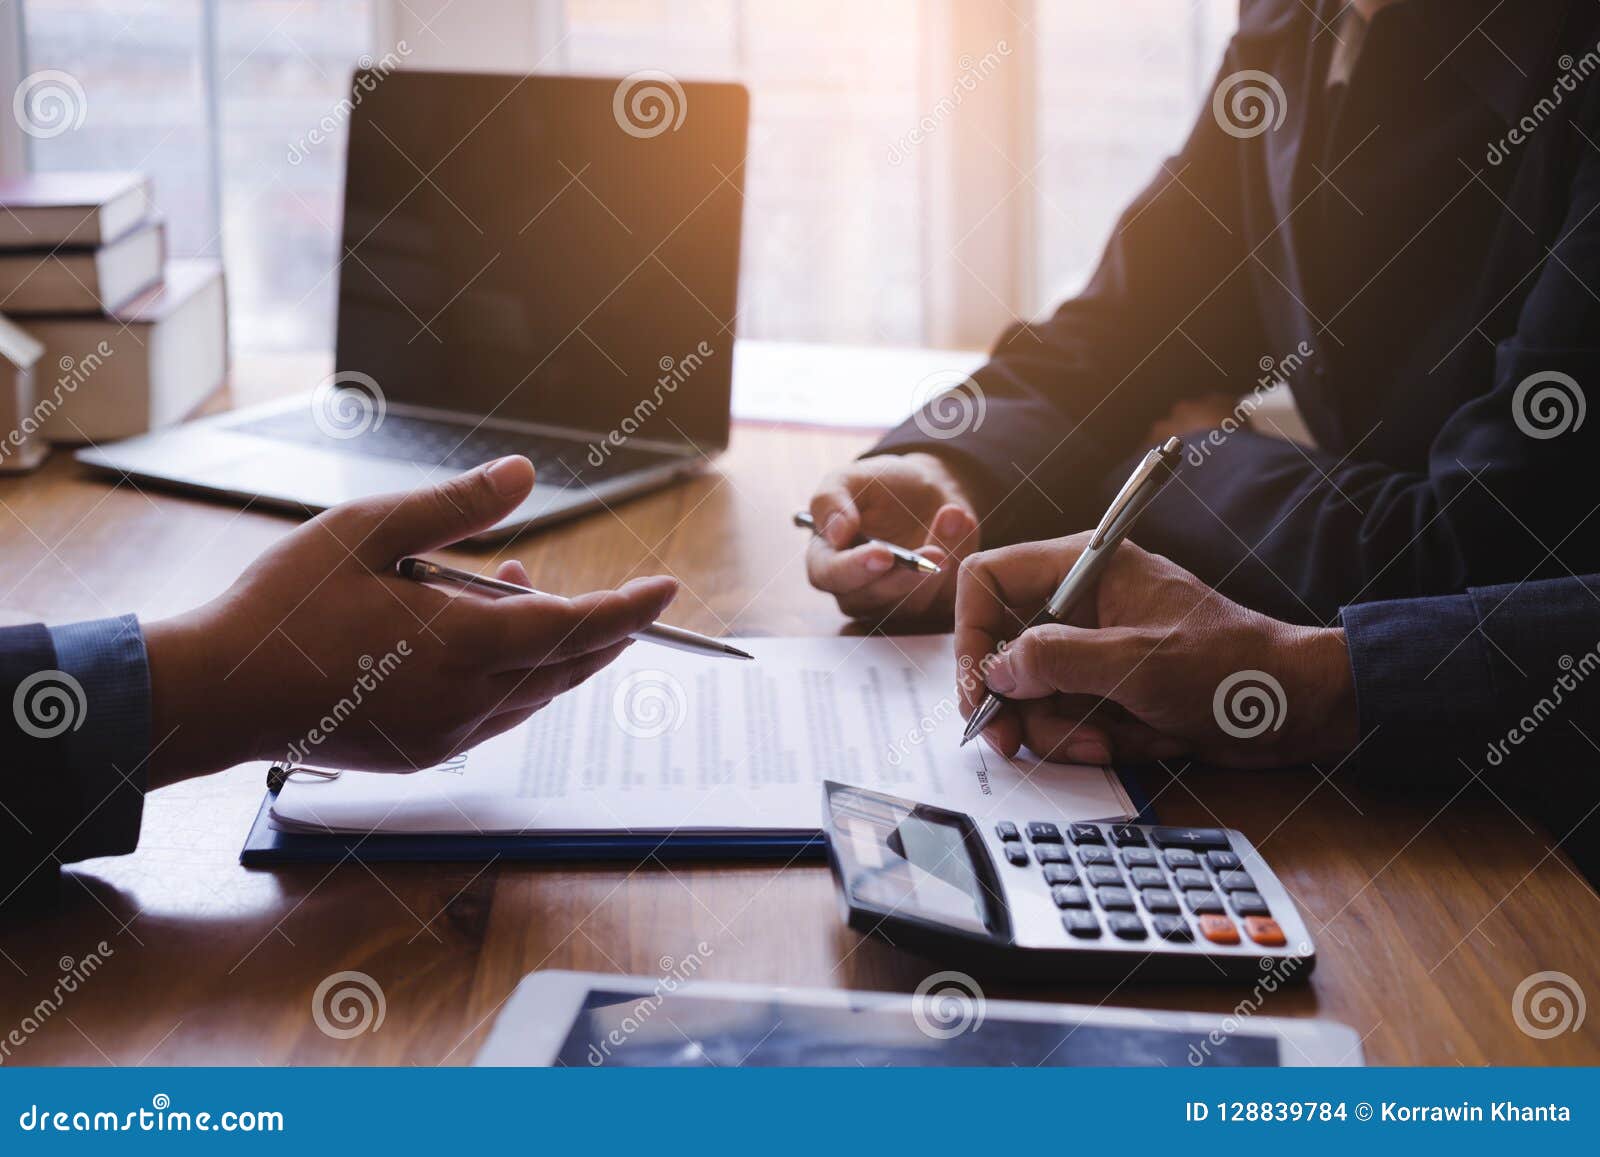 business team meeting present, co-investment signing contract agreement policy after finishing up a meeting or negotiation.